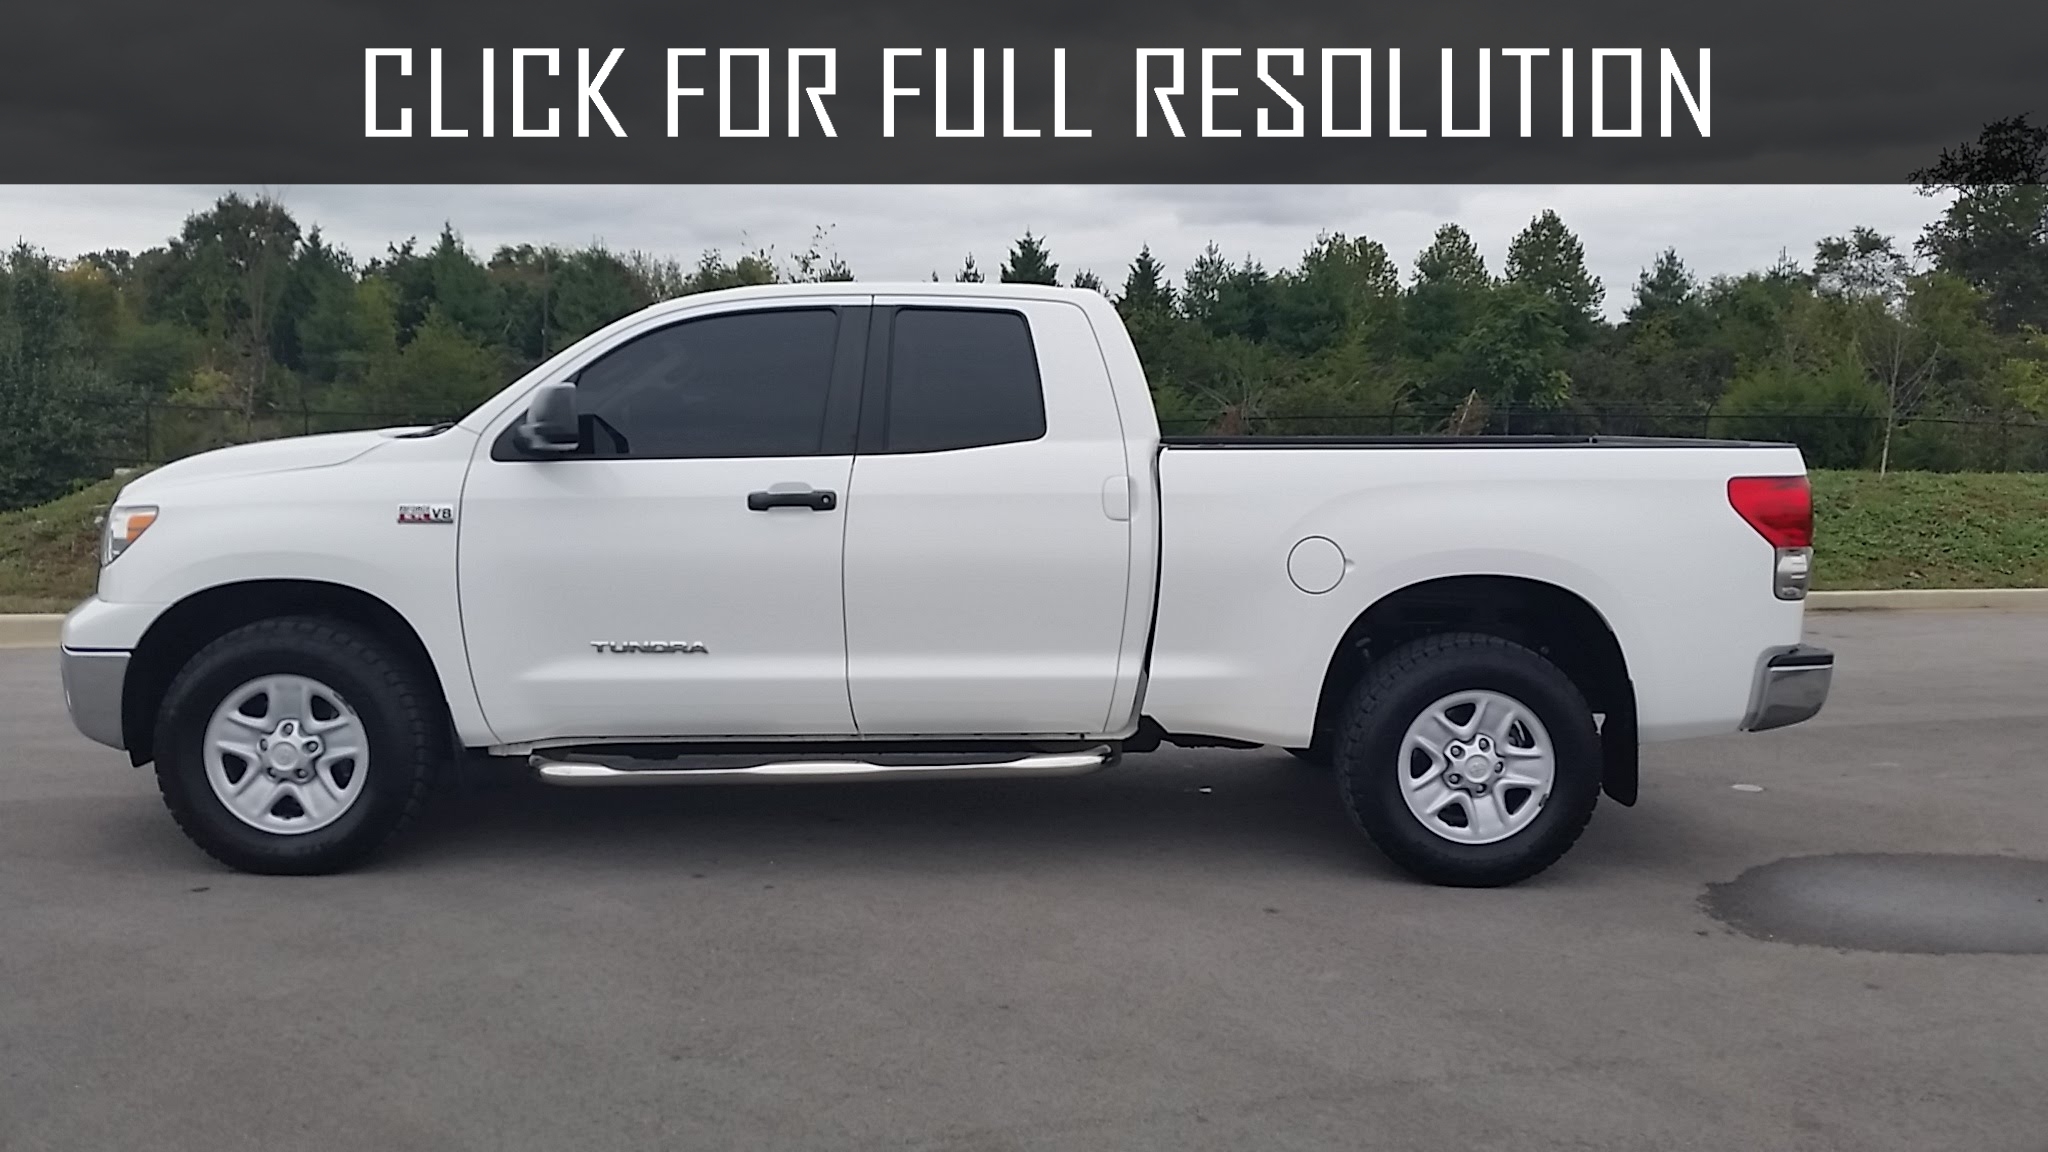 Toyota Tundra Extended Crew Cab